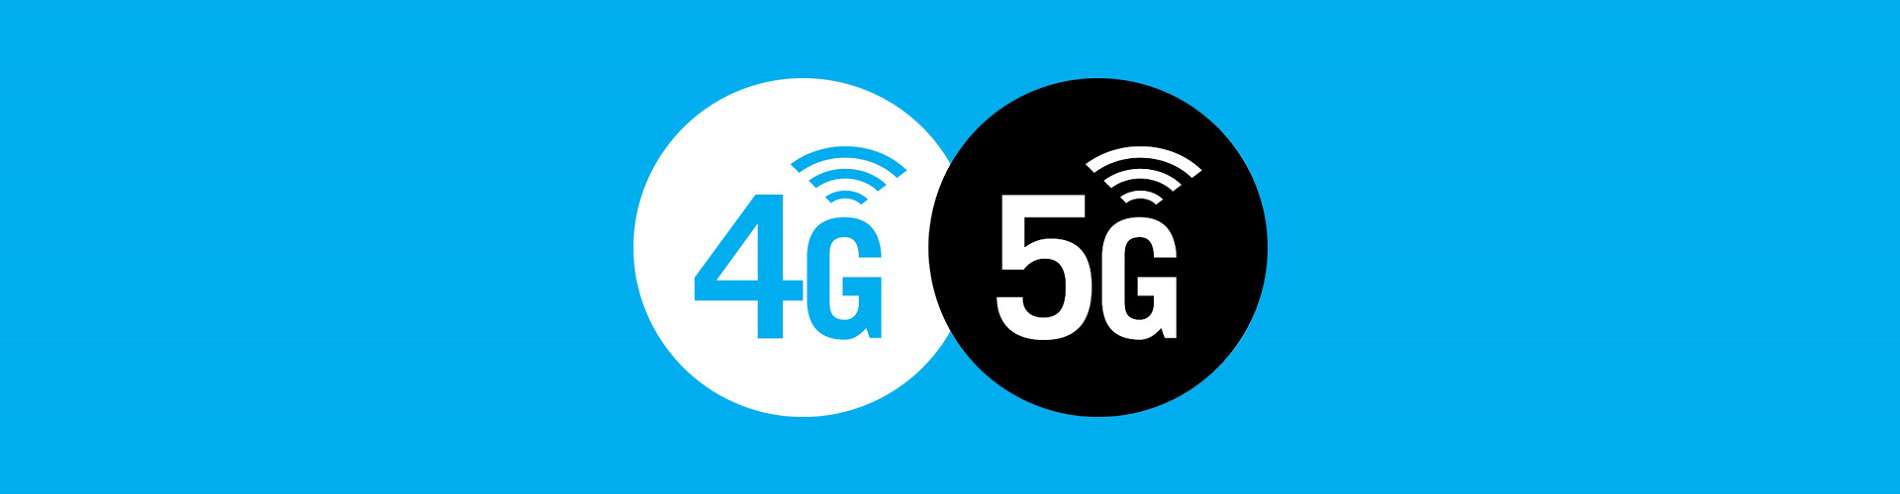 4G or 5G